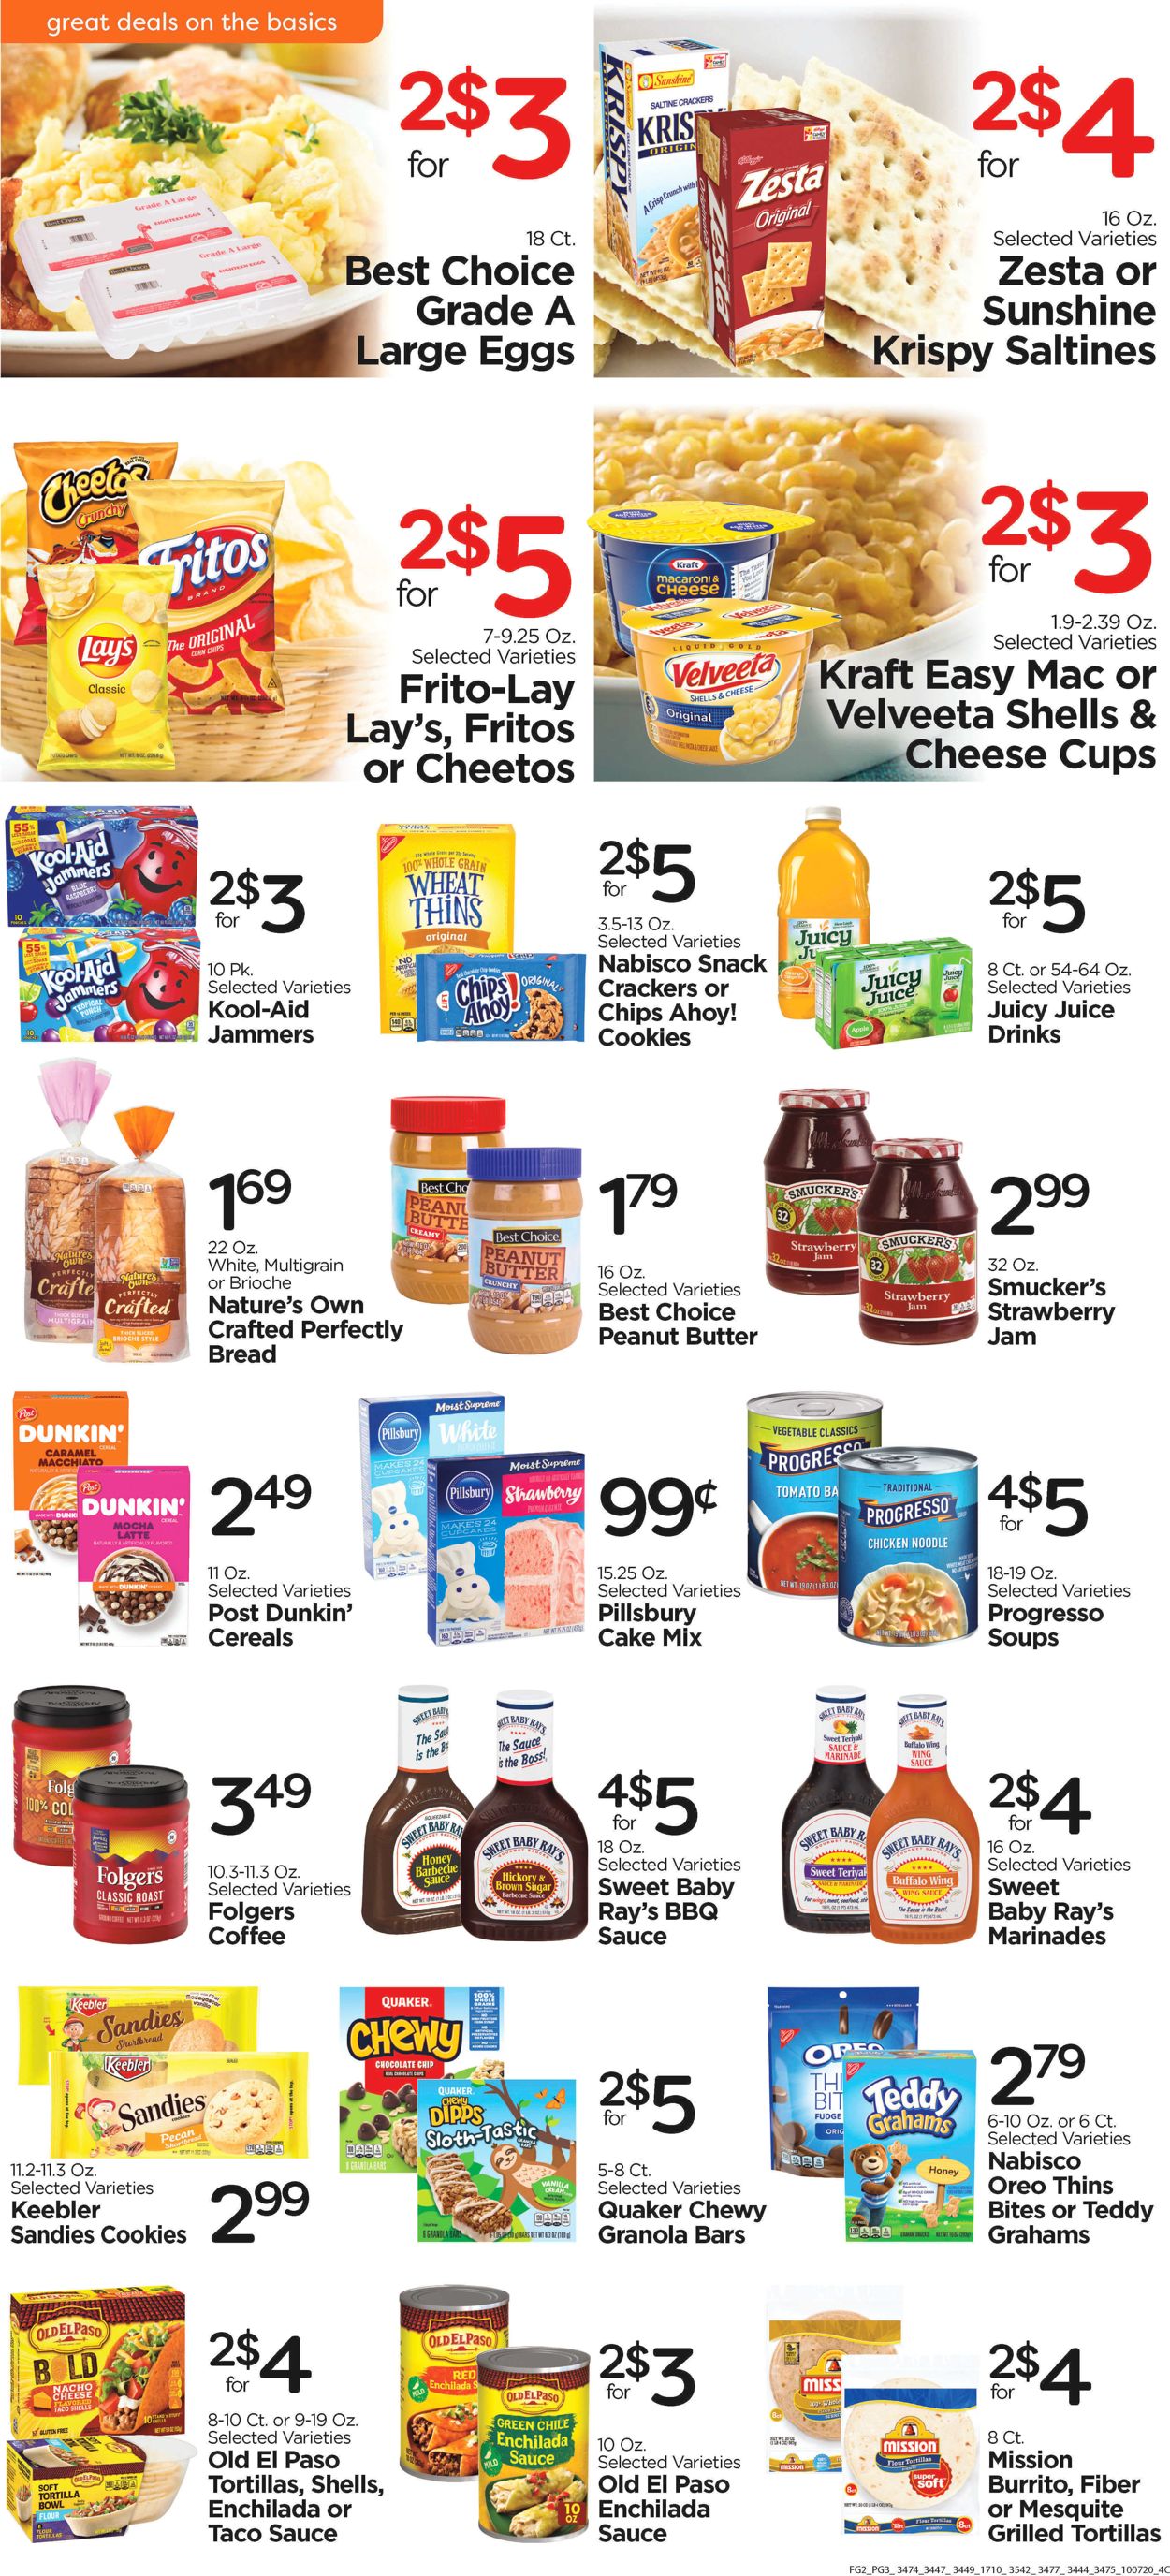 Edwards Food Giant Ad from 10/07/2020